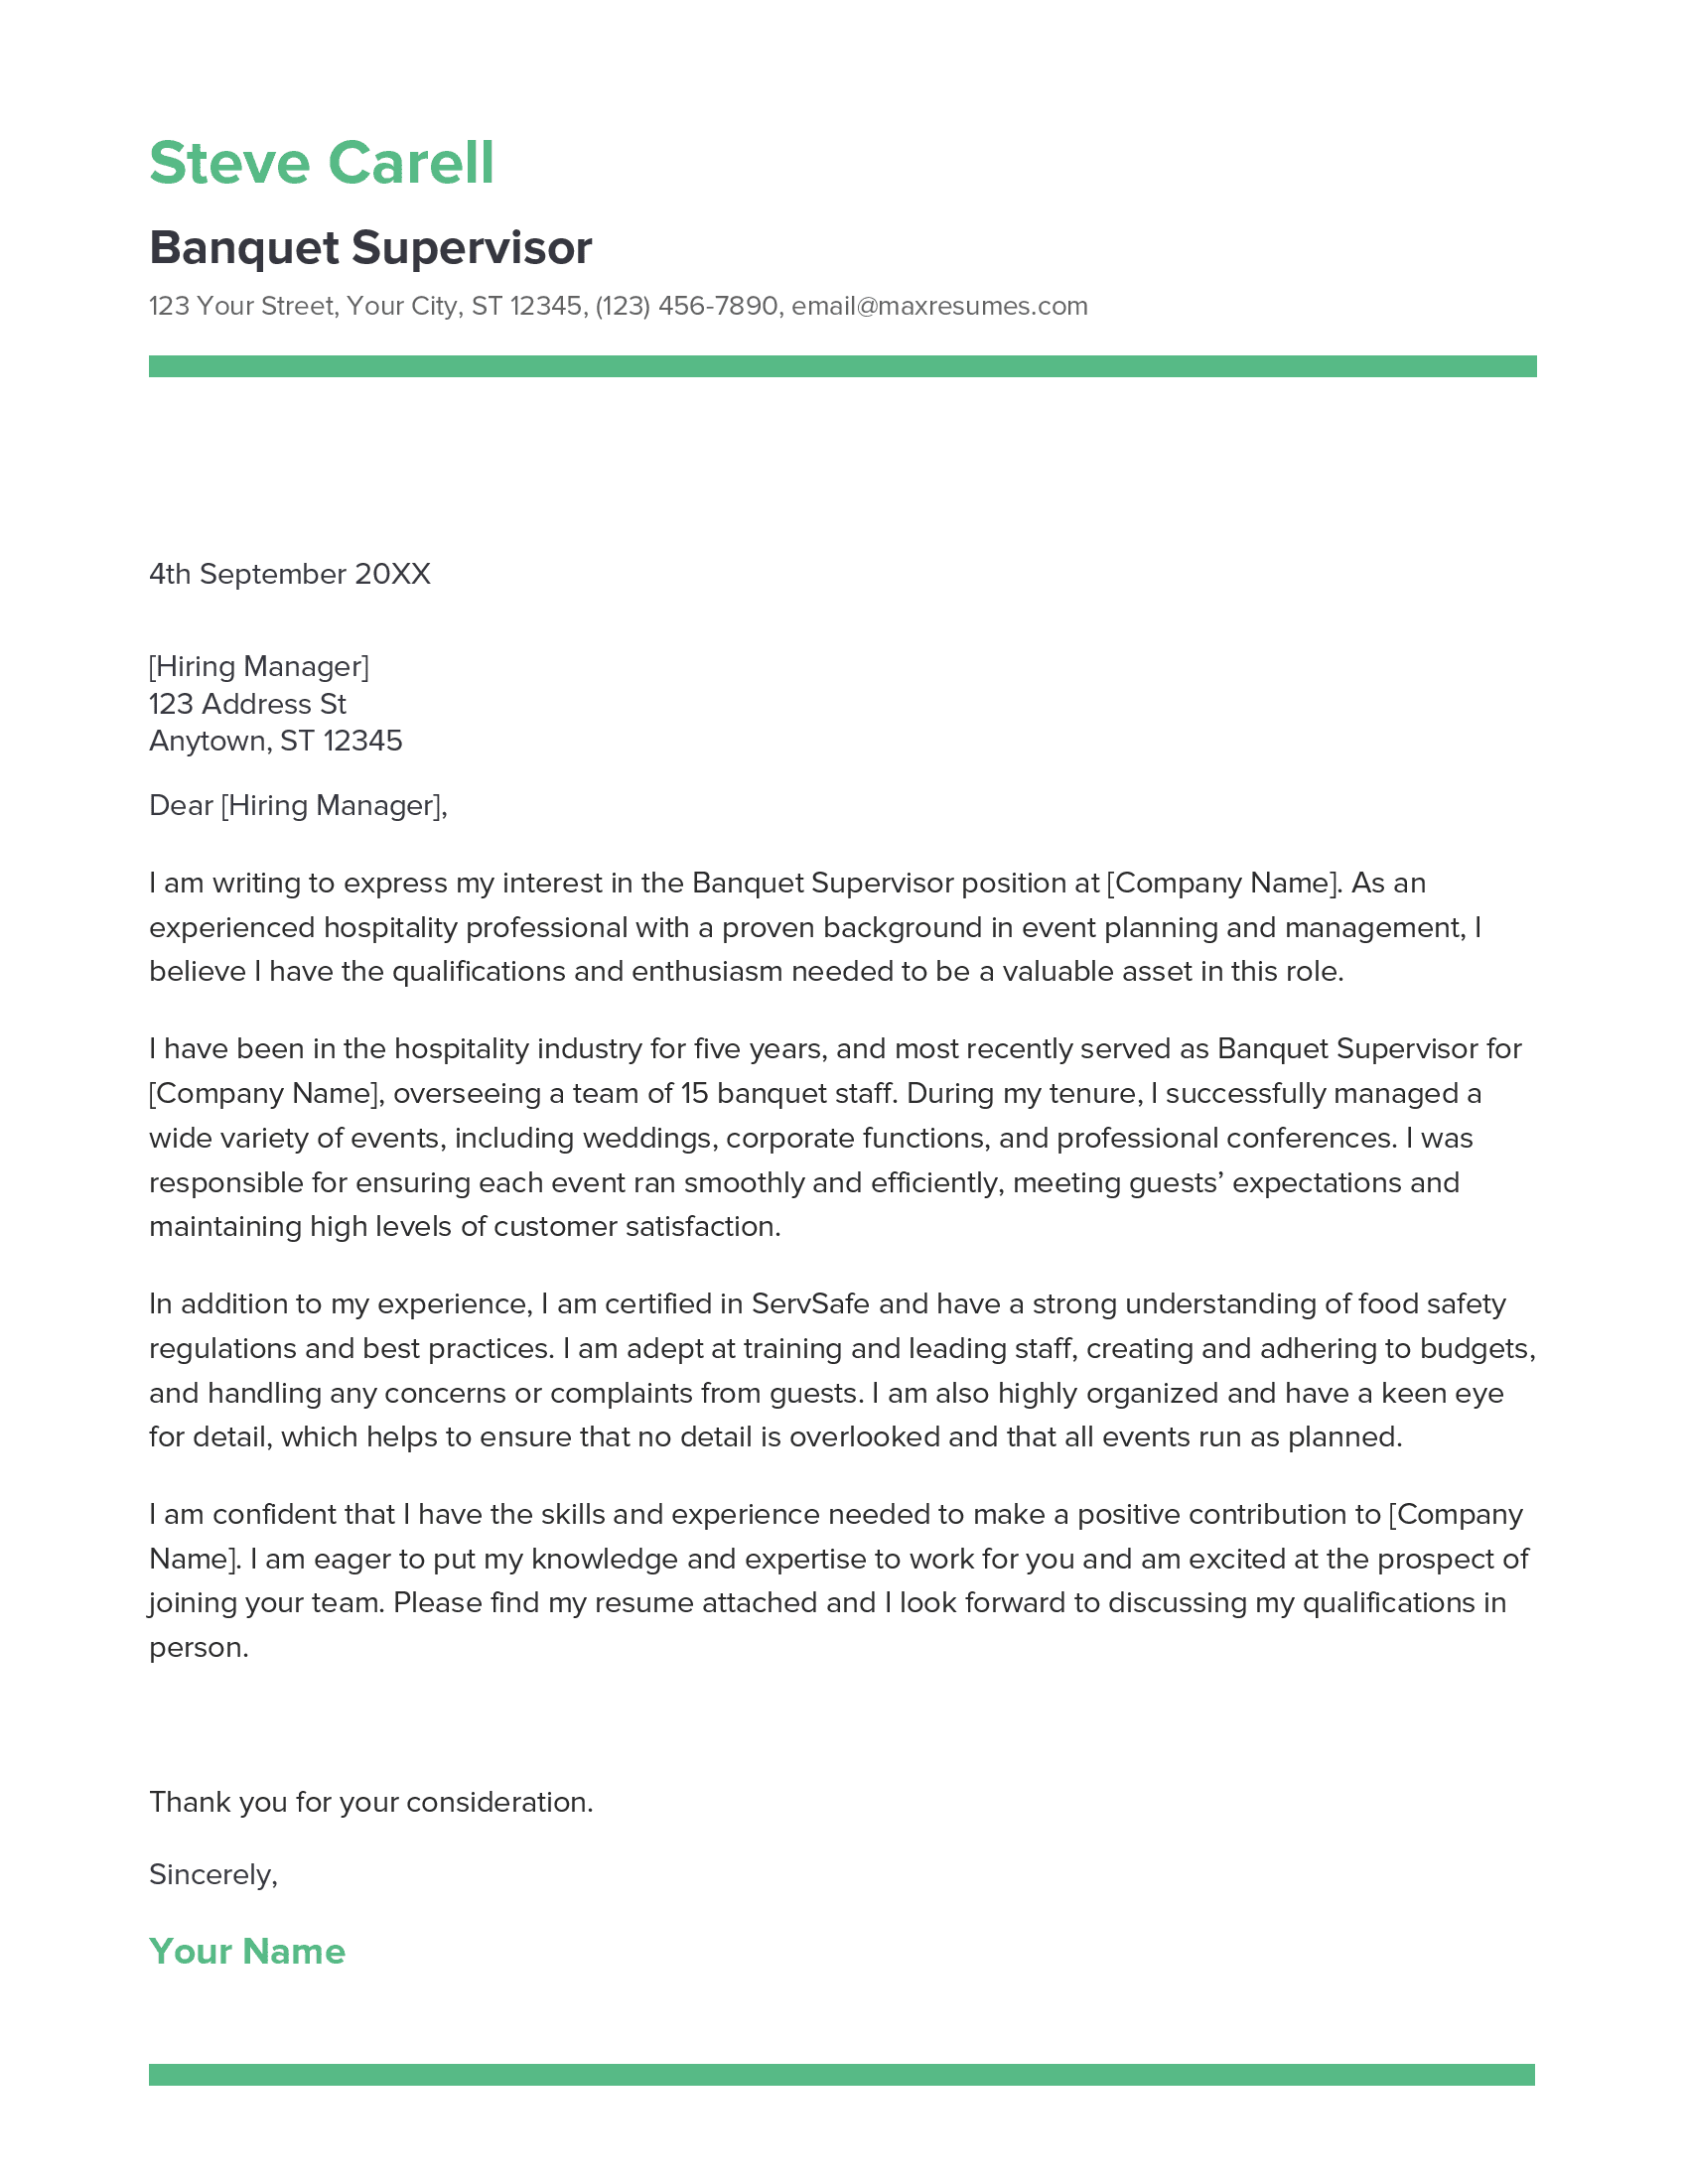 Banquet Supervisor Cover Letter Example